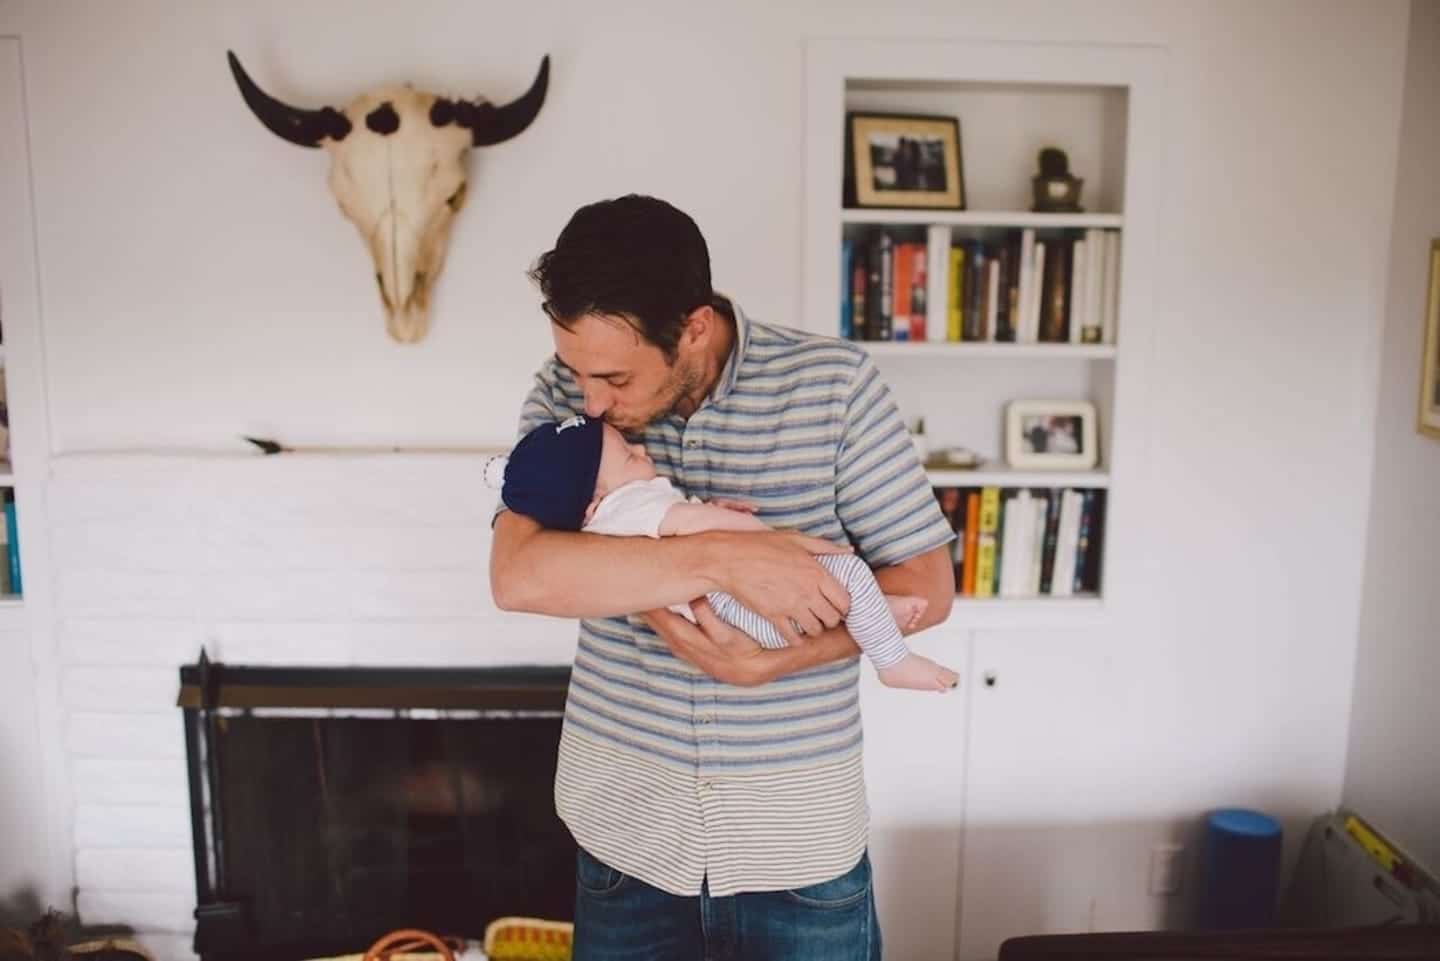 Millennial dads spend 3 times as much time with their kids than previous generations -